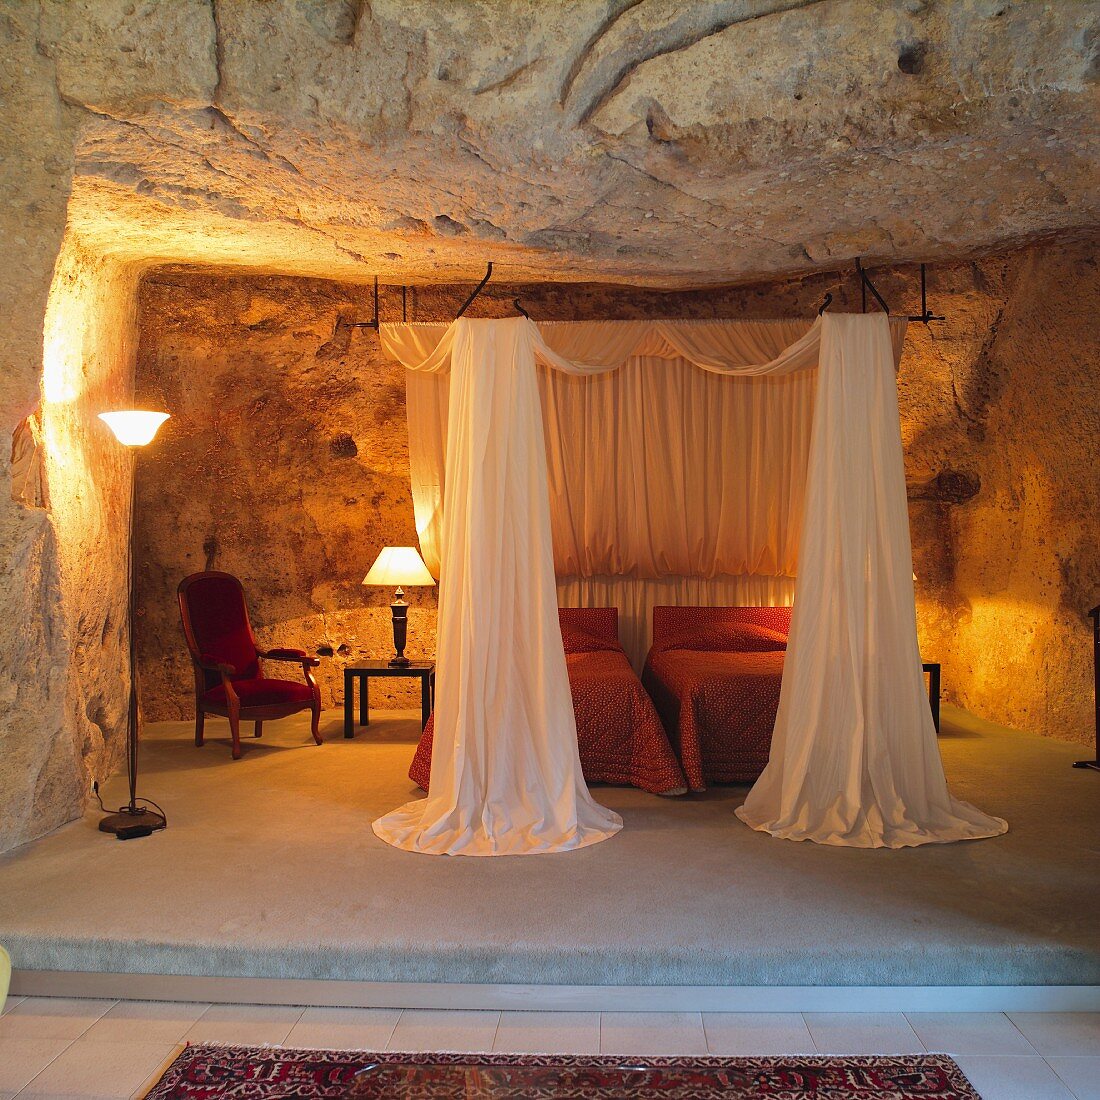 Open-plan sleeping area on platform - twin beds with canopy and lit table lamps in grotto-style niche